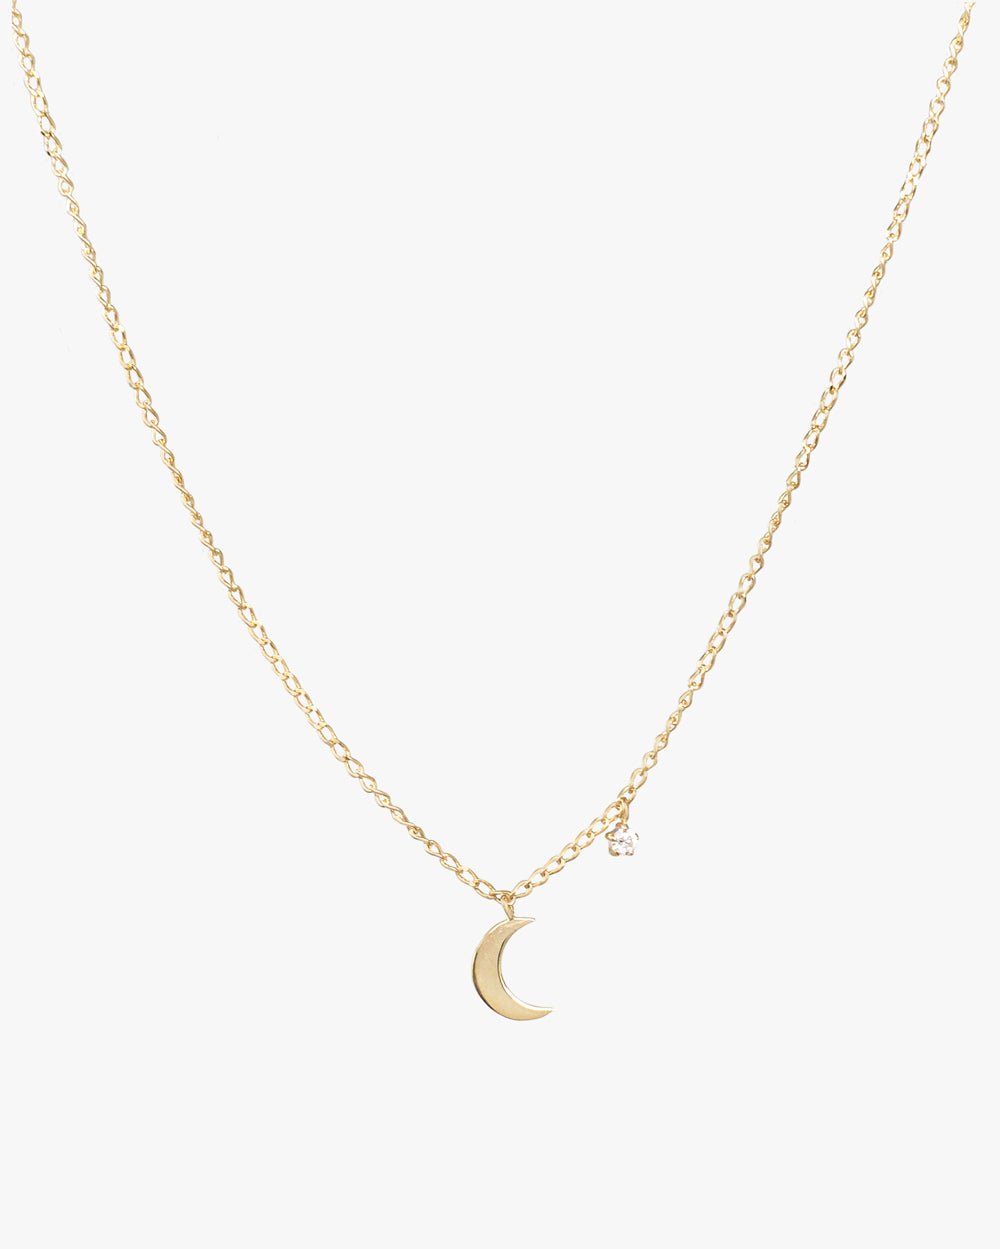 GRIFFITH MOON AND DIAMOND NECKLACE - Shop Cupcakes and Cashmere